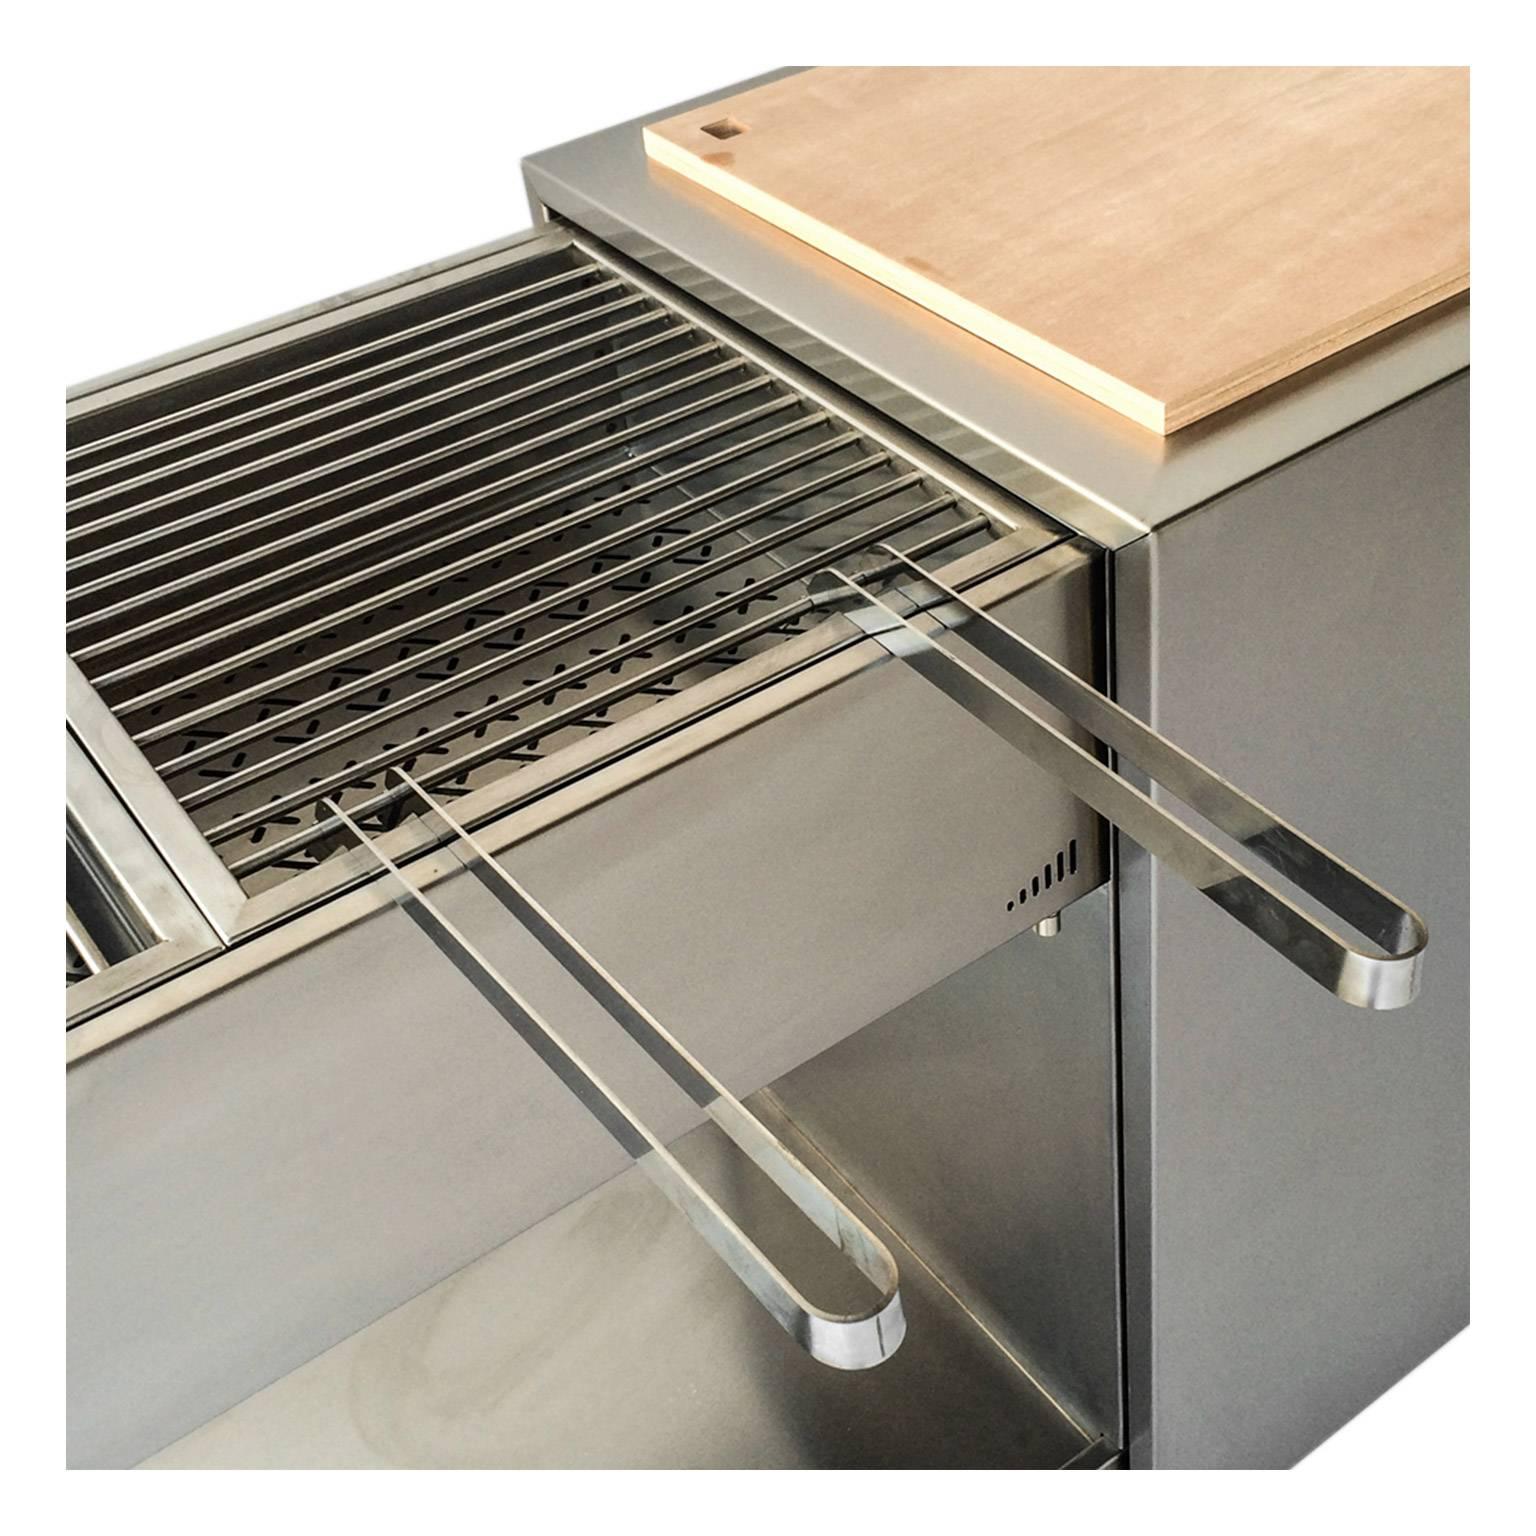 Functional Outdoor Stainless Steel Charcoal Barbecue with Sliding Grills, Snail In New Condition For Sale In Palermo, IT